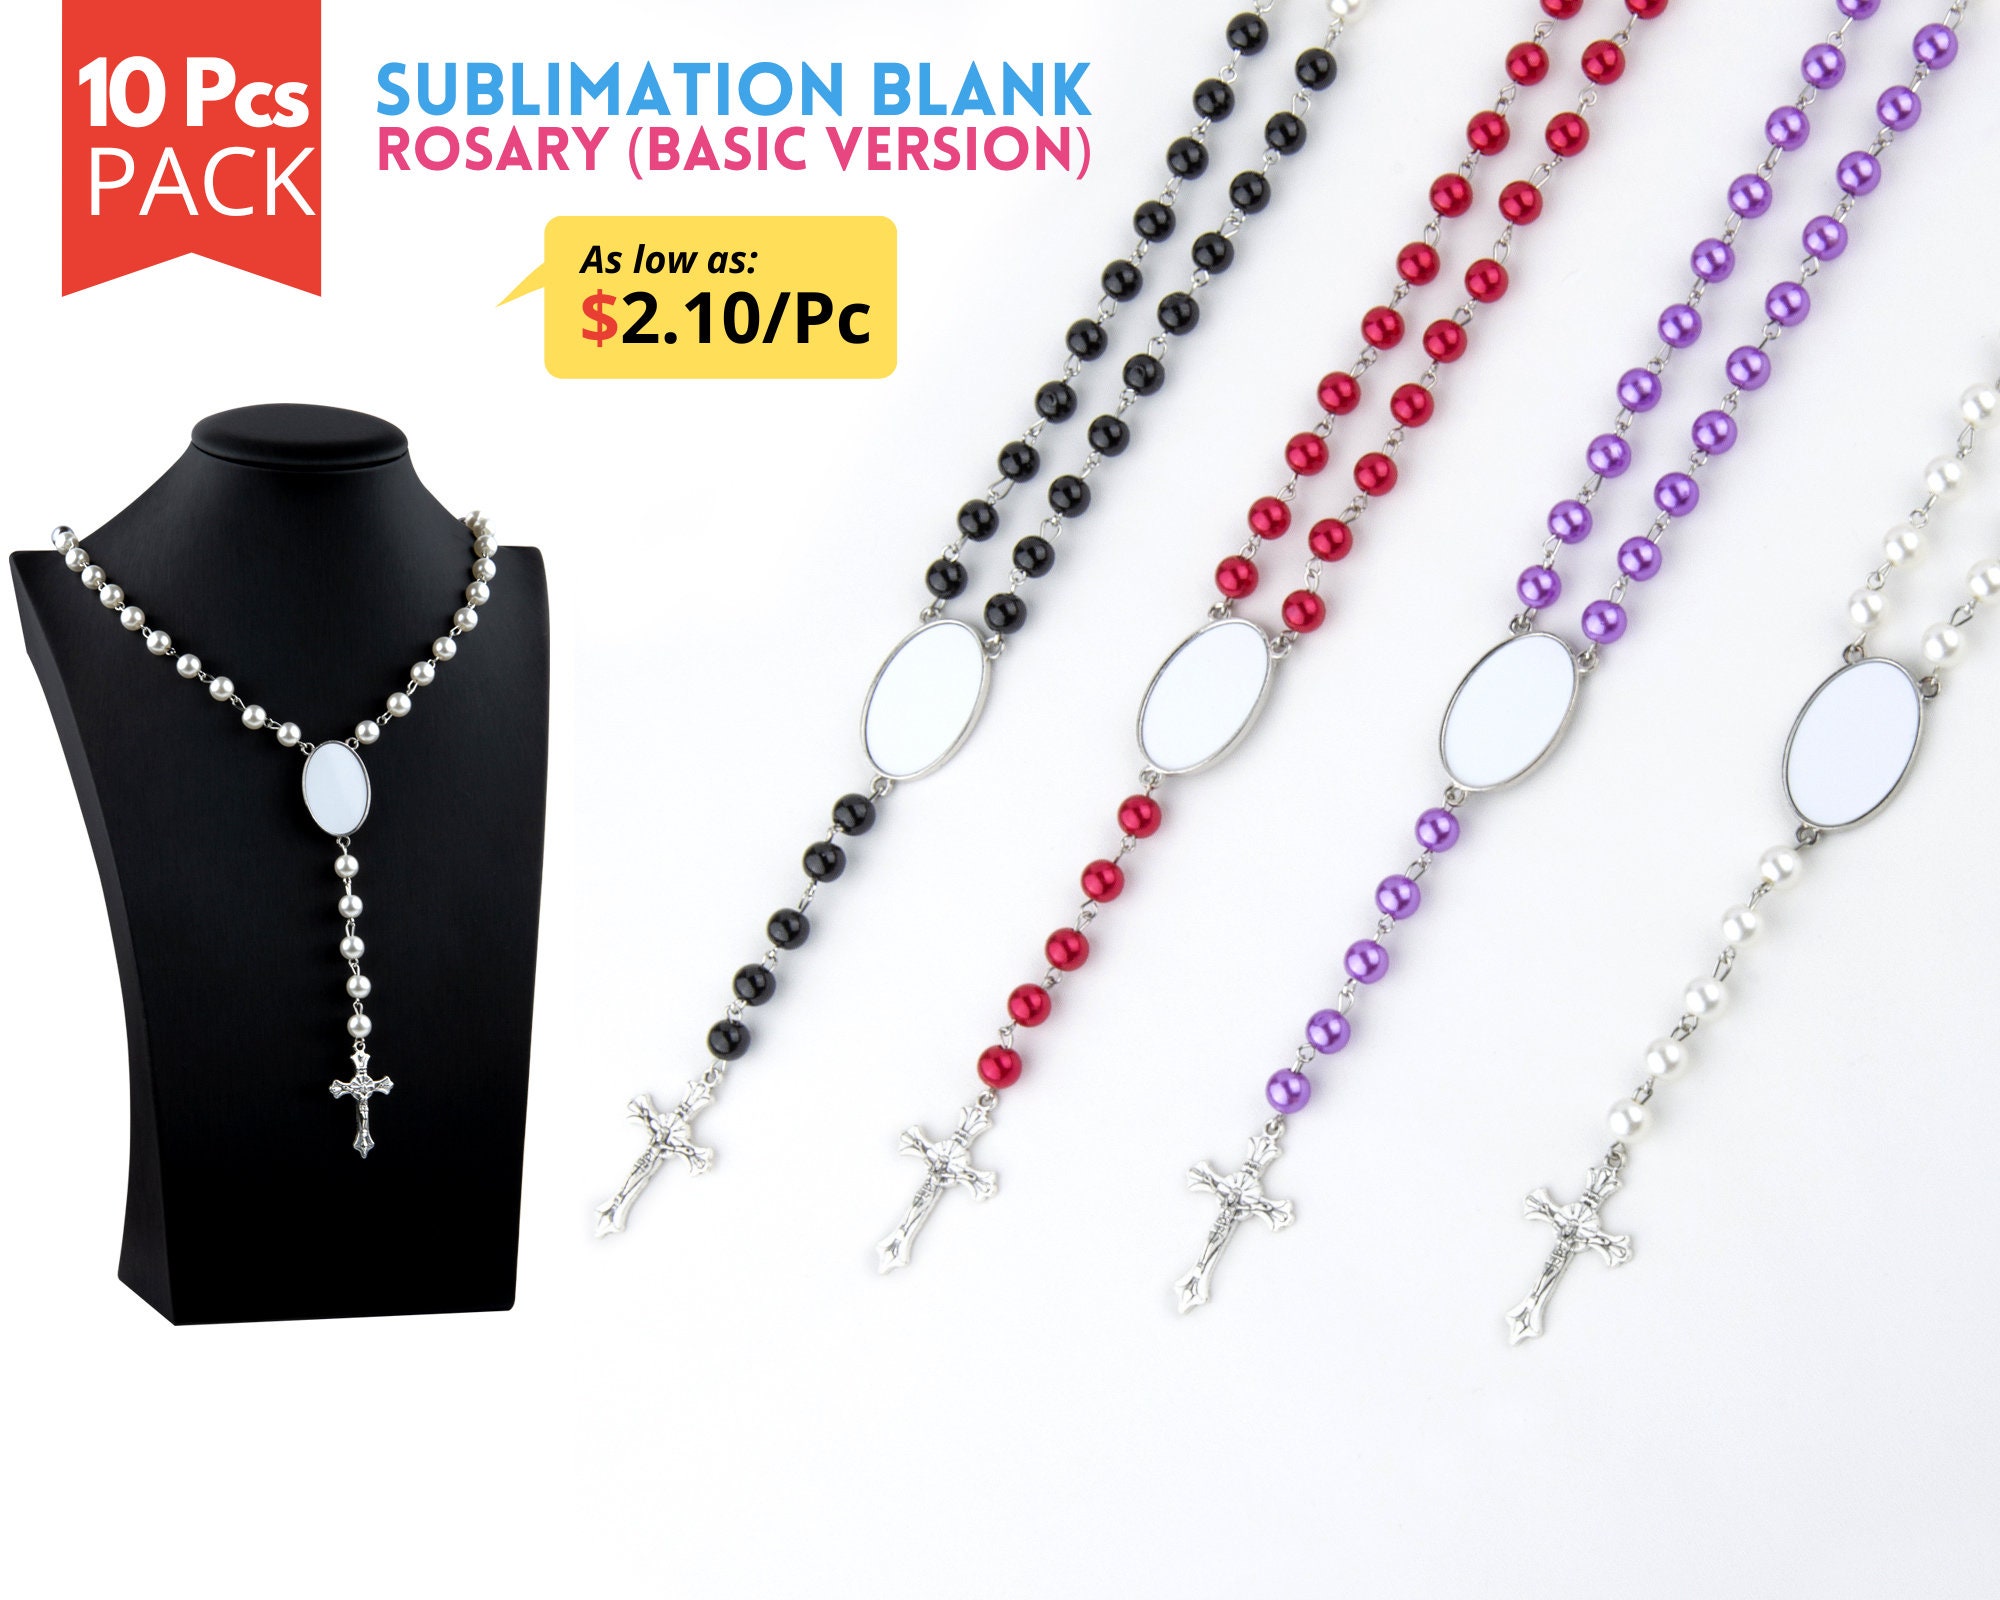 ZUYYON 6 Pcs Sublimation Blank Rosaries Sublimation Prayer Beads Necklace  Heat Transfer Blank Rosary Printable Necklace for Baptism Catholic Gifts  DIY